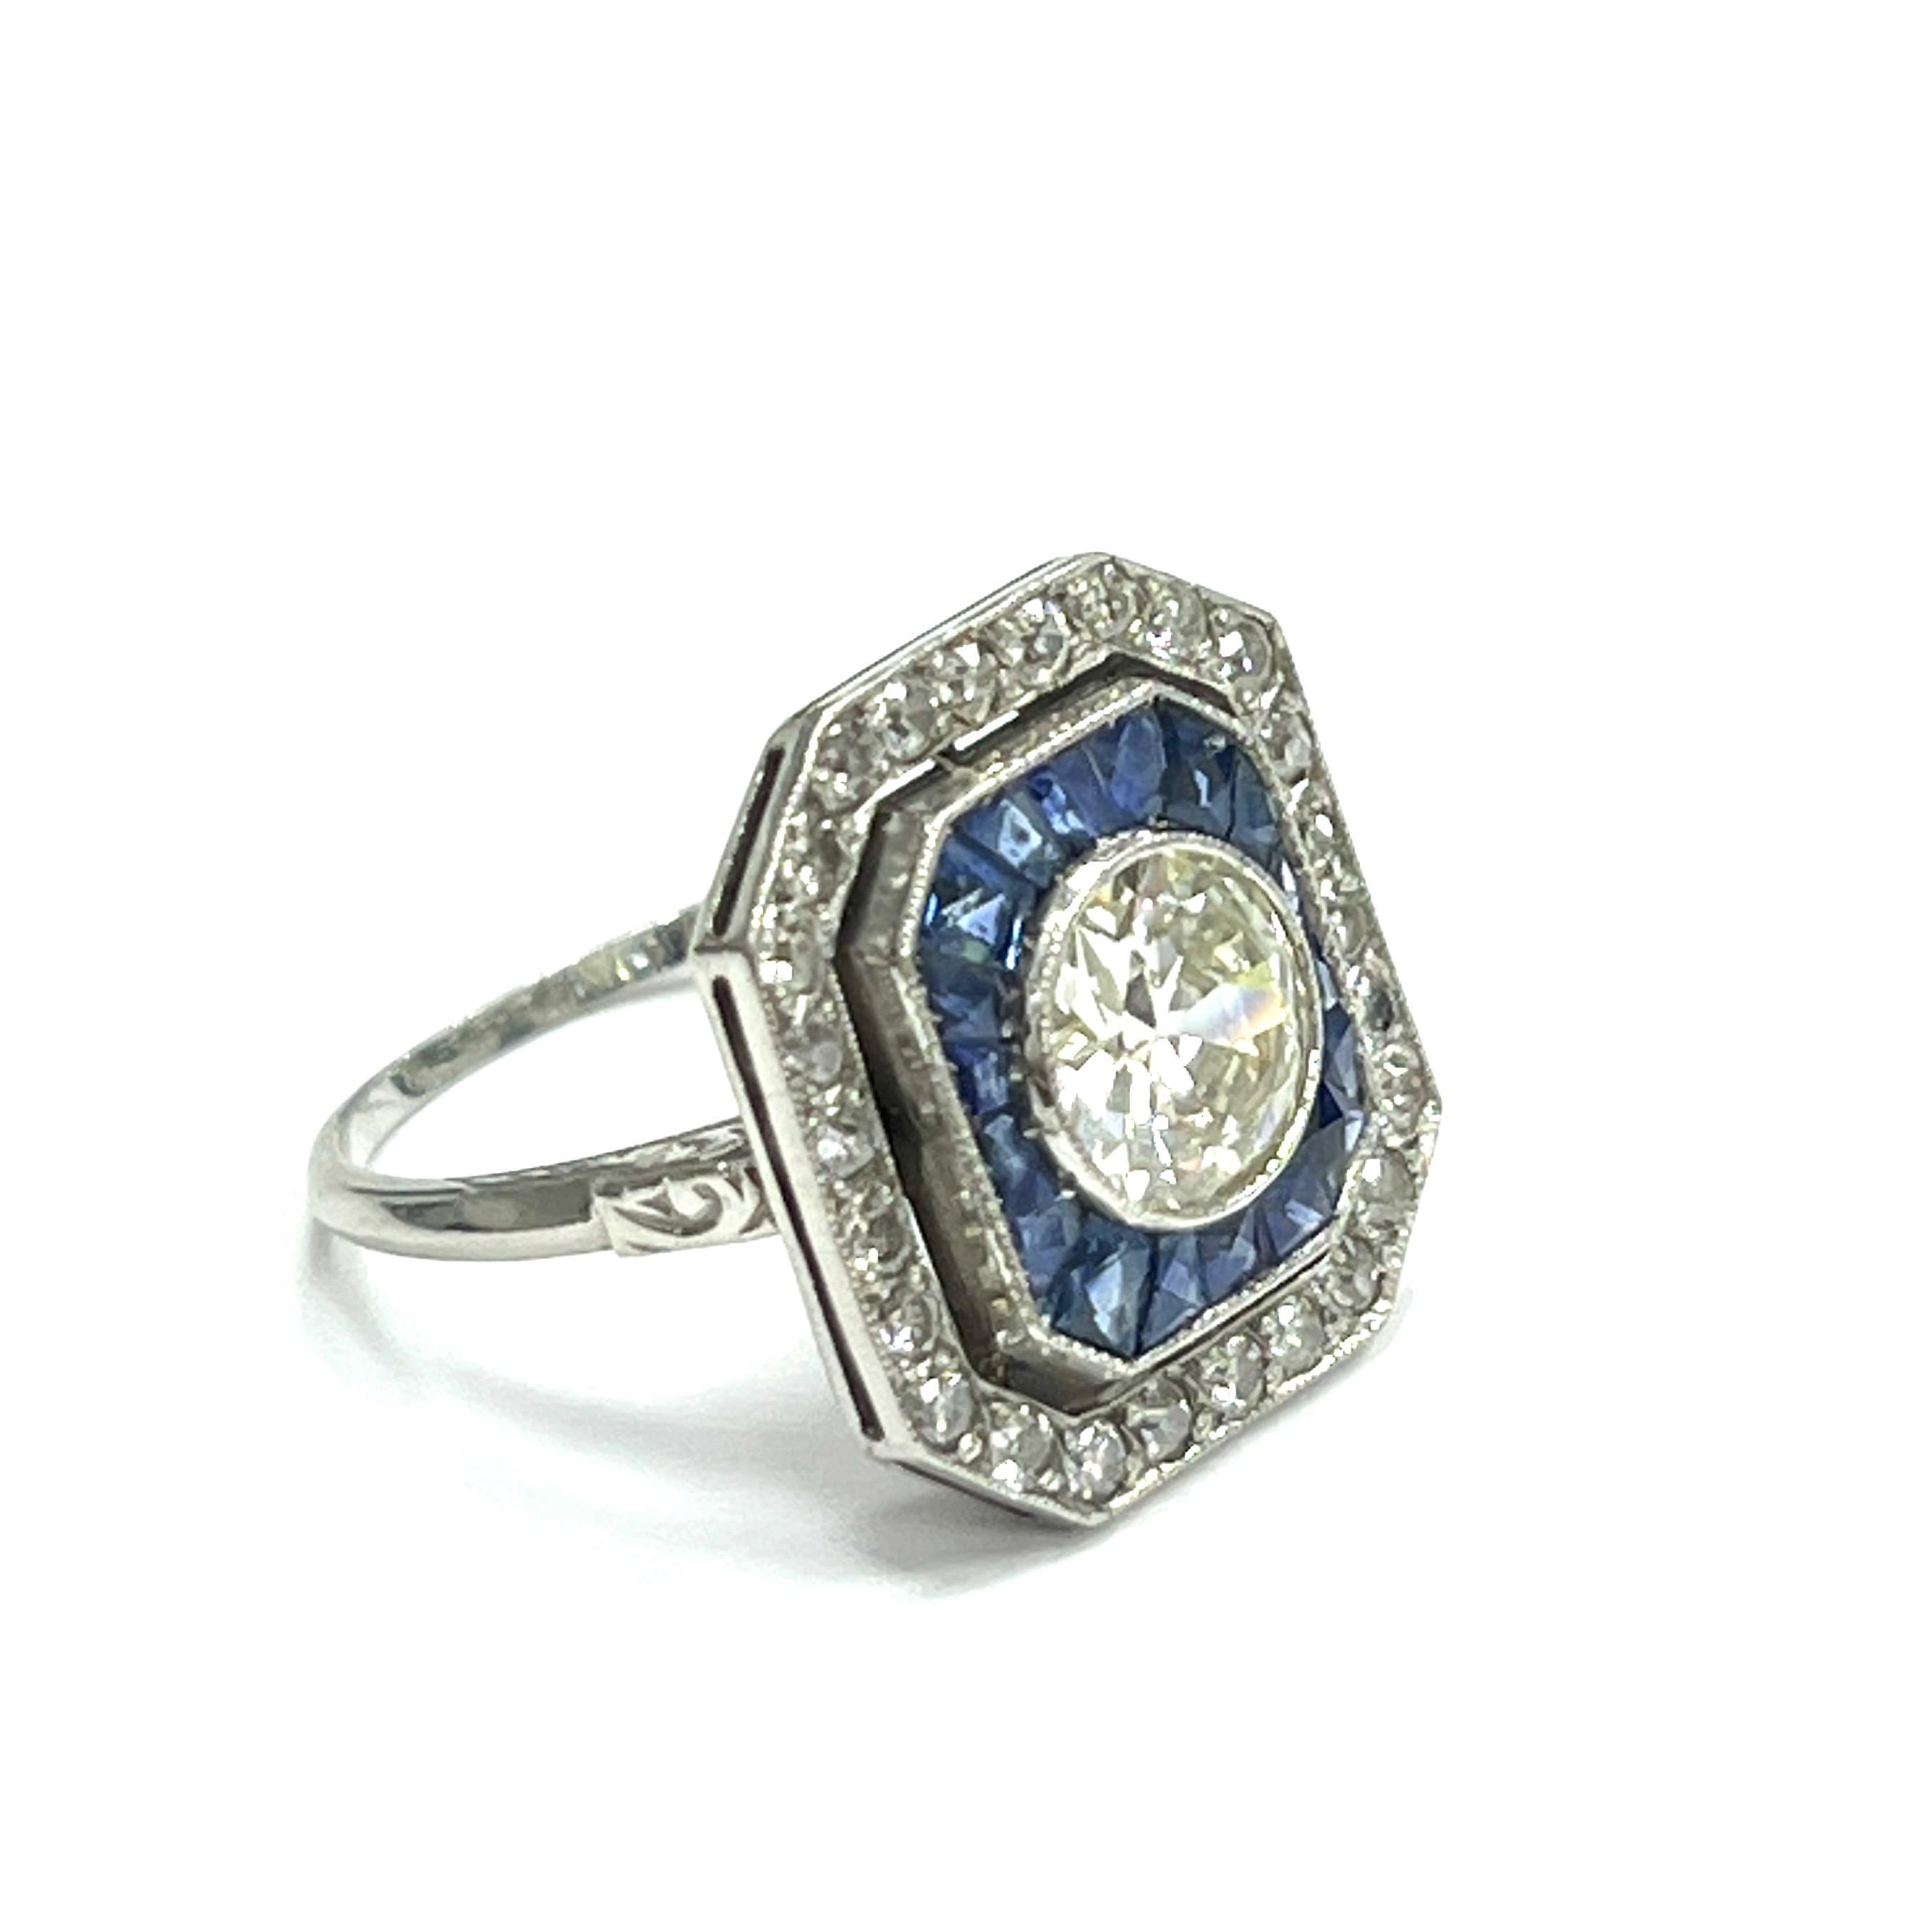 Art Deco Diamond Sapphire Ring, circa 1920s

Round-cut center stone of 1.35 carats with color J-K, clarity SI1-SI2; remaining diamonds weigh 0.50 carat; calibre-cut sapphires of 1 carat; white gold mounting. Top width 17 mm, top length 18 mm.

Size: